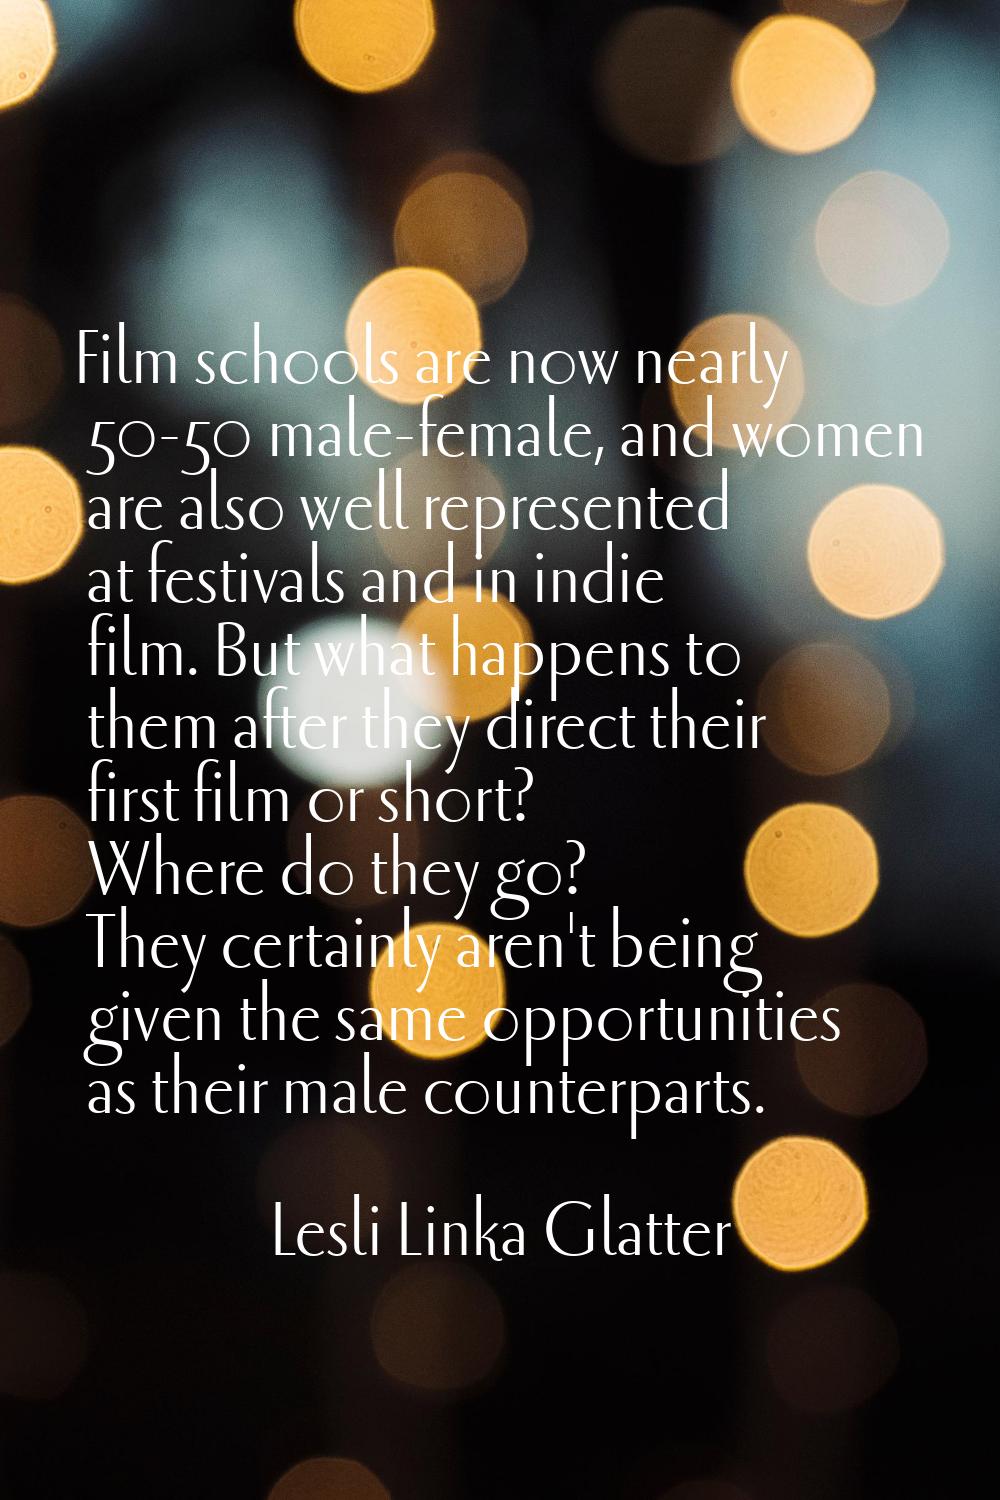 Film schools are now nearly 50-50 male-female, and women are also well represented at festivals and